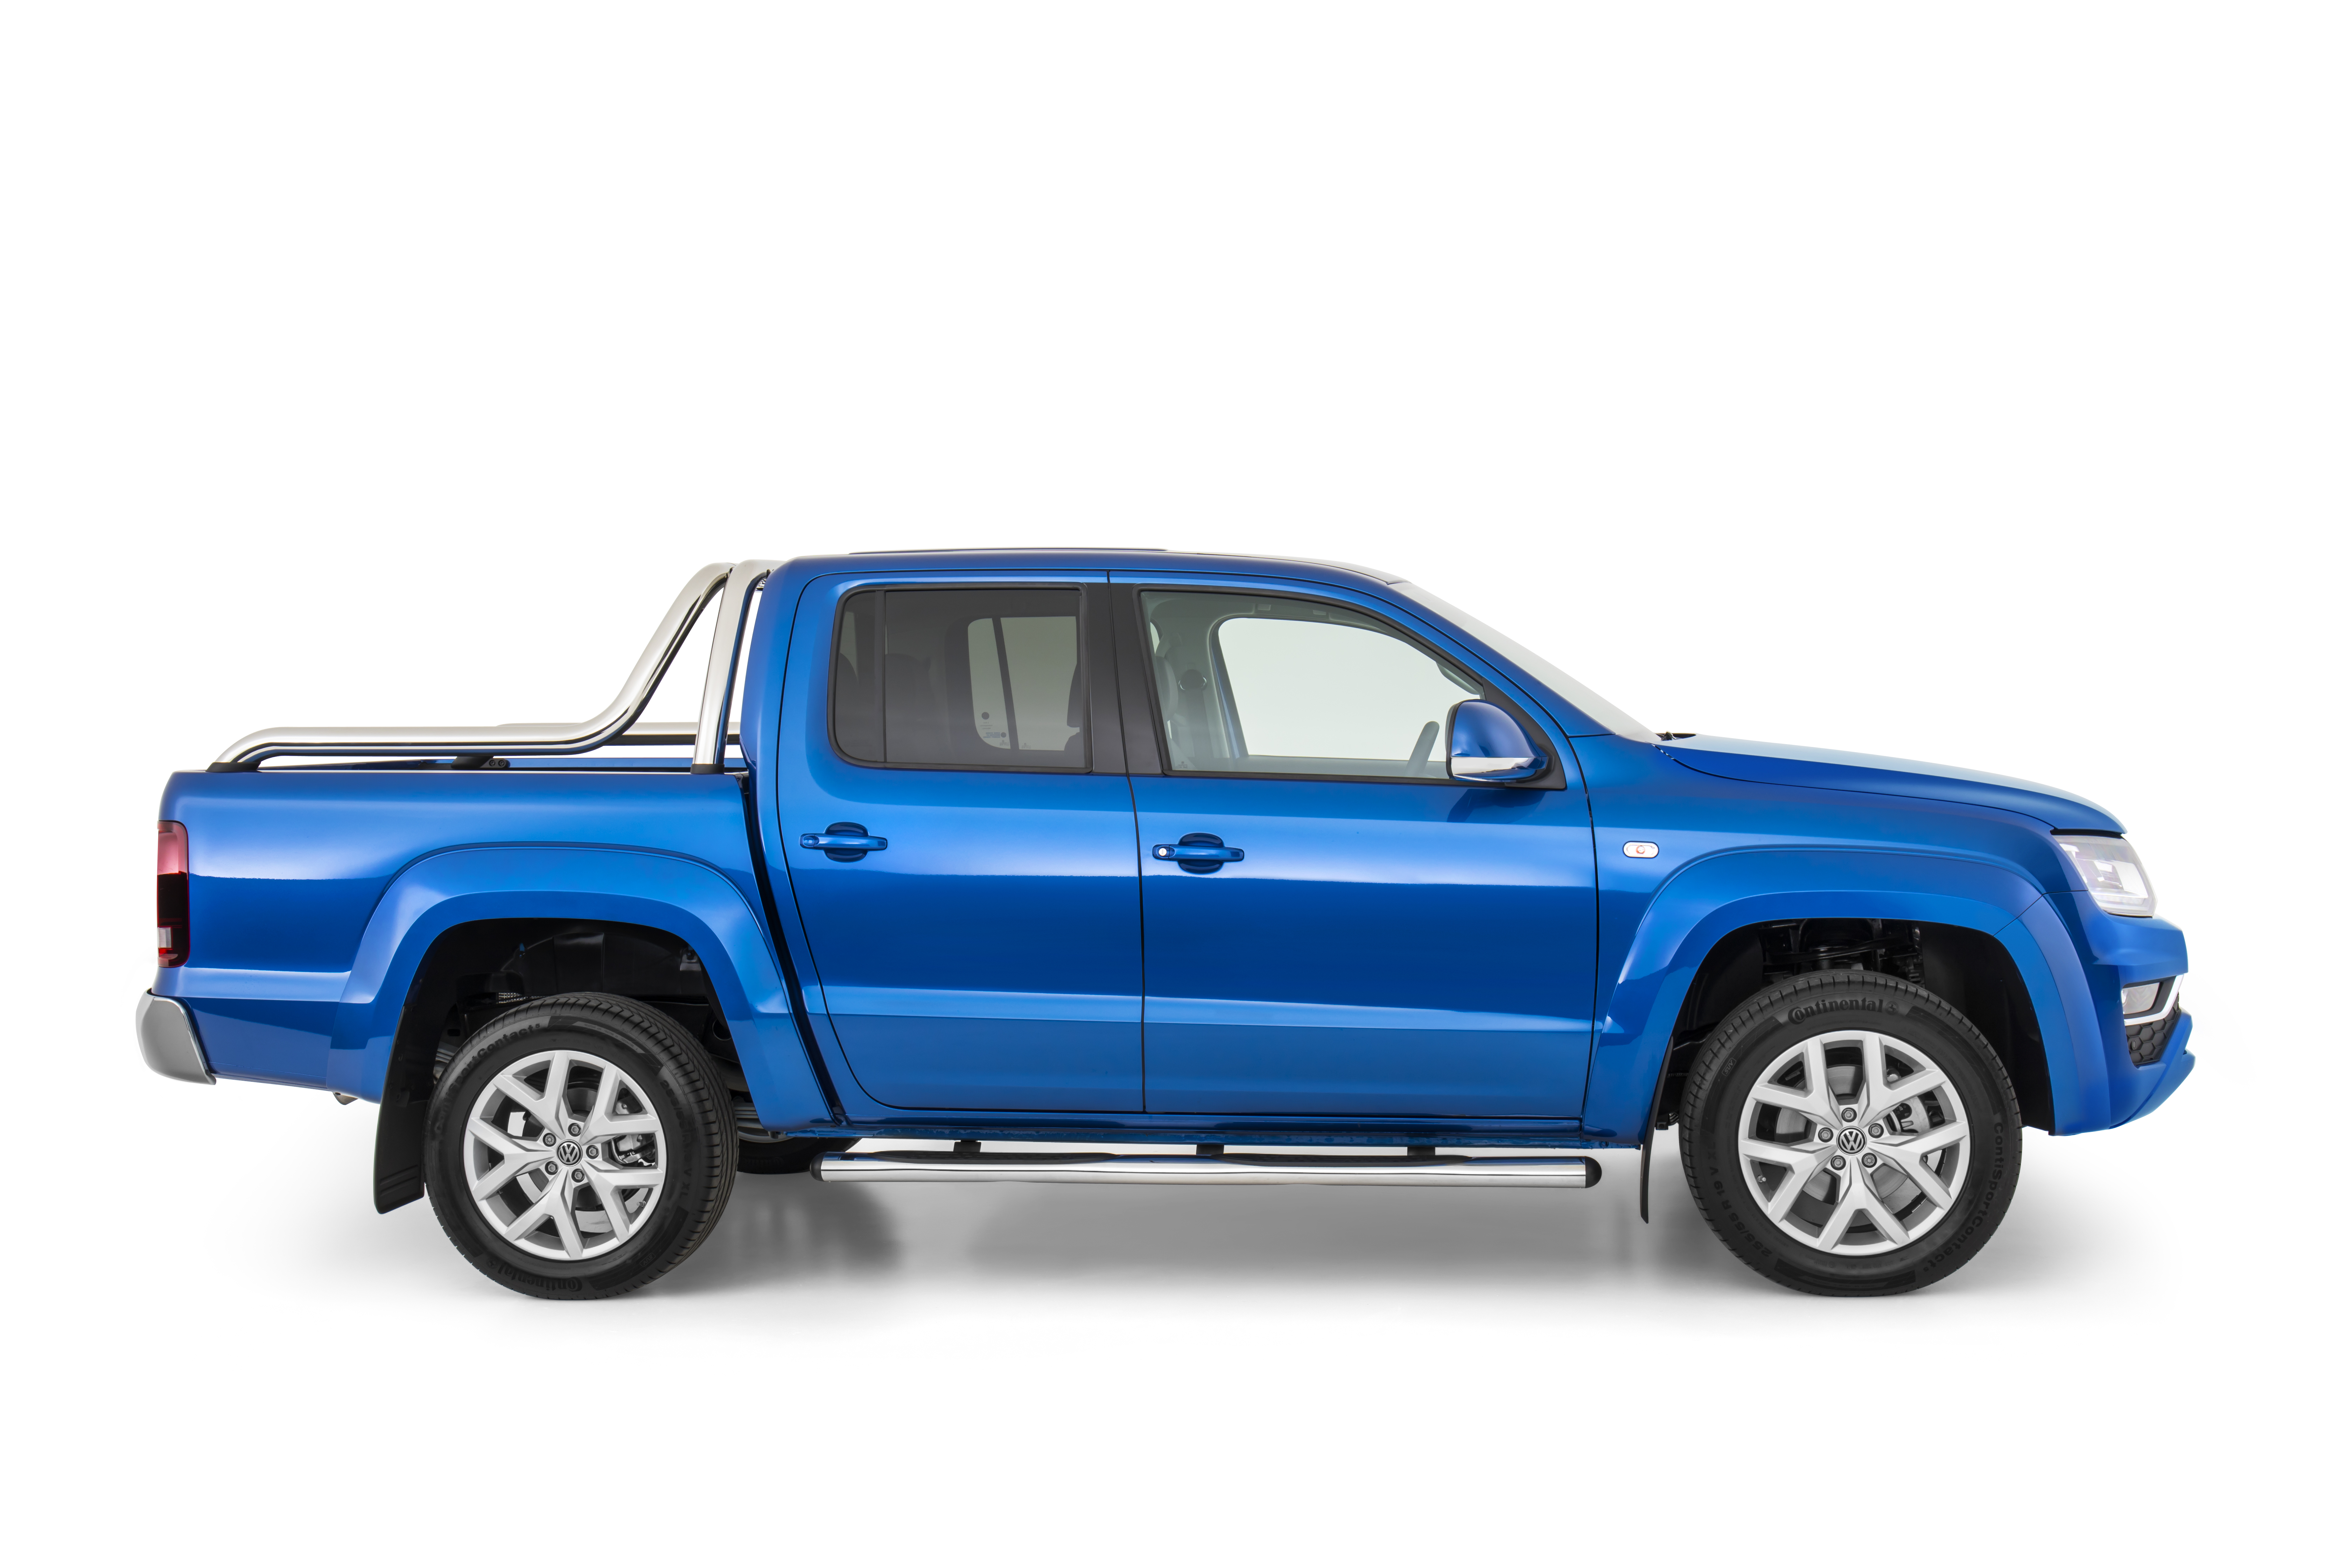 Ford Ranger Extra Cab hd 2015